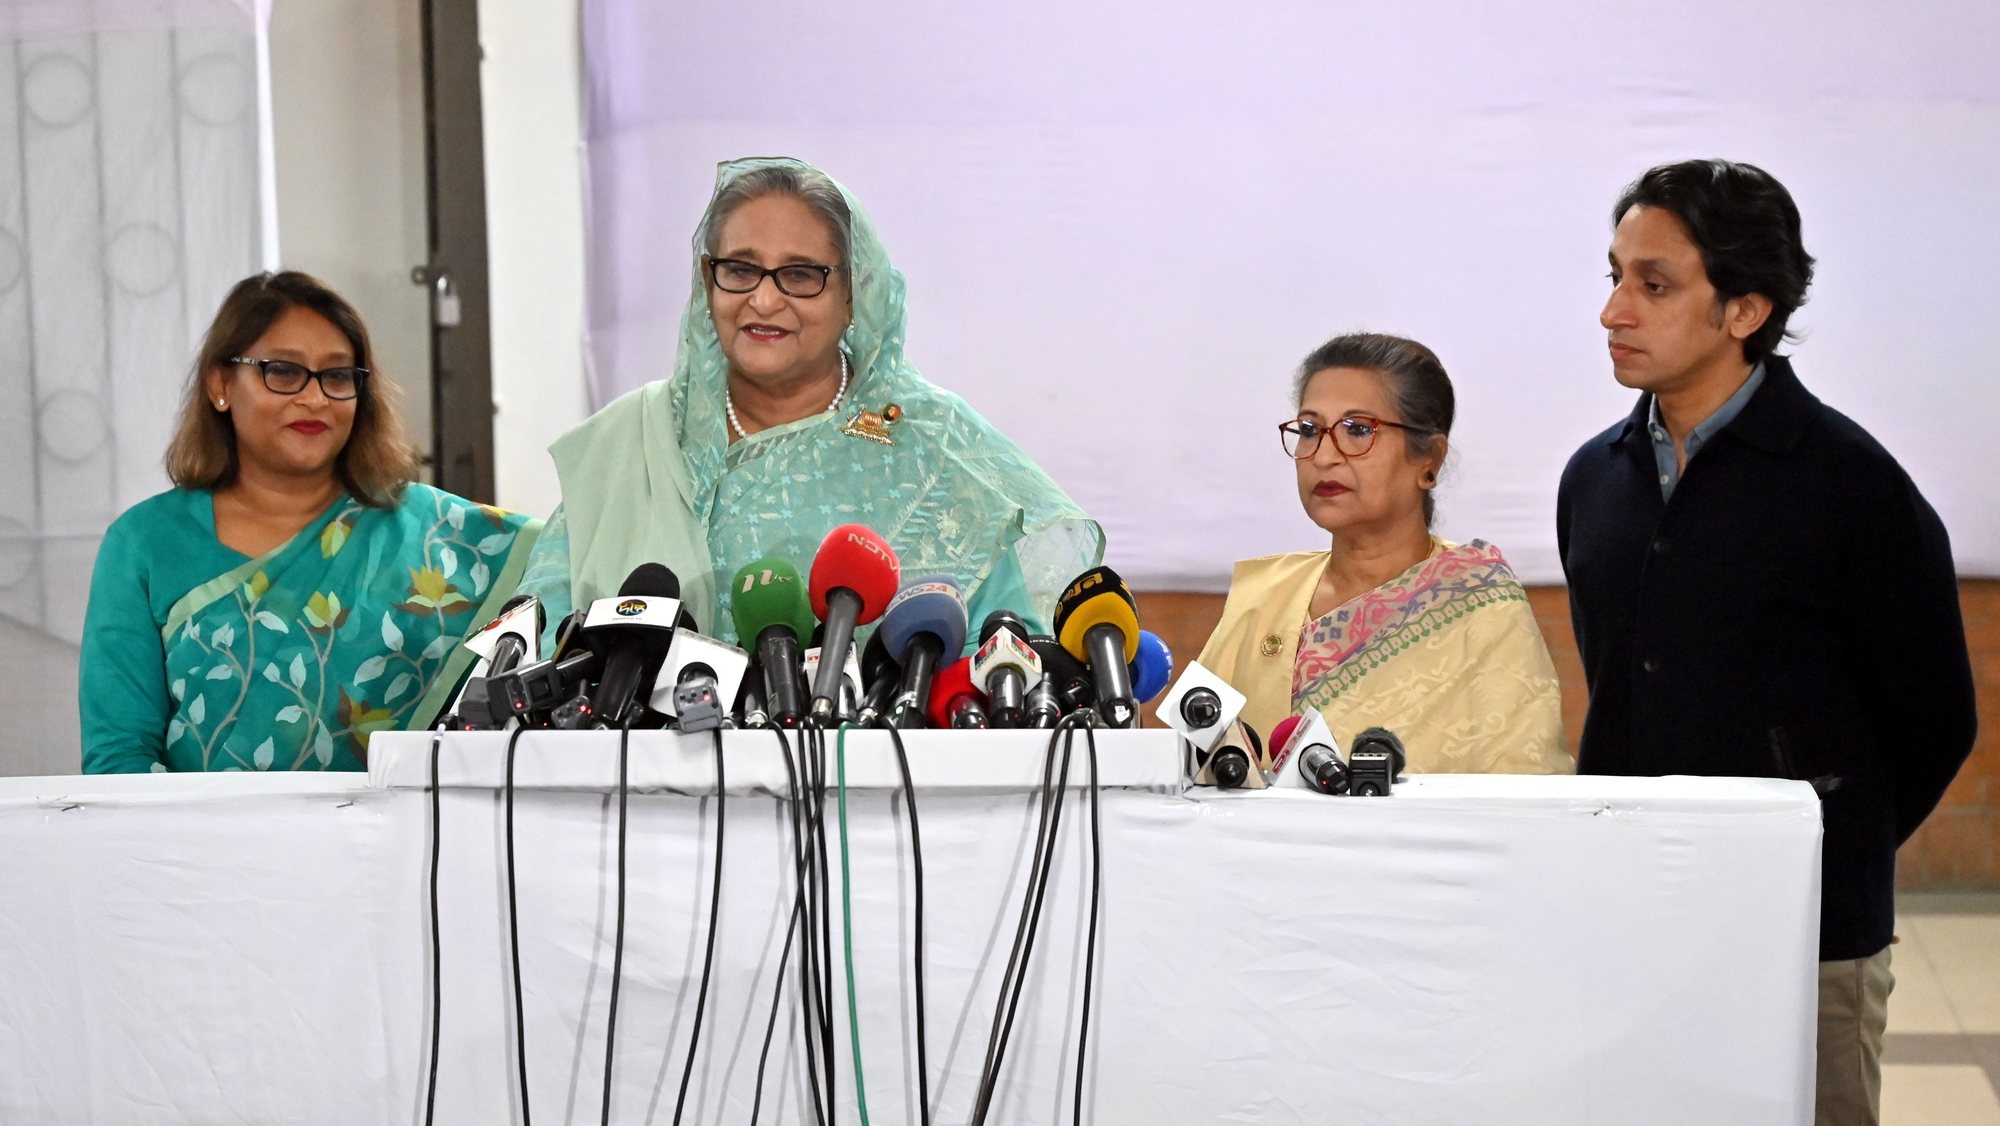 epa11062520 A handout photo made available by the Bangladesh prime minister&#039;s office shows Bangladesh Prime Minister and Awami League President Sheikh Hasina (C) talking to the media after casting her vote at the Dhaka City College polling center during the 12th national general election in Dhaka, Bangladesh, 07 January 2024. The last general election in Bangladesh was held in 2018. People are voting to select members of the national parliament, also known as Jatiya Sangsad.  EPA/BANGLADESH PRIME MINISTER&#039;S OFFICE / HANDOUT  HANDOUT EDITORIAL USE ONLY/NO SALES HANDOUT EDITORIAL USE ONLY/NO SALES